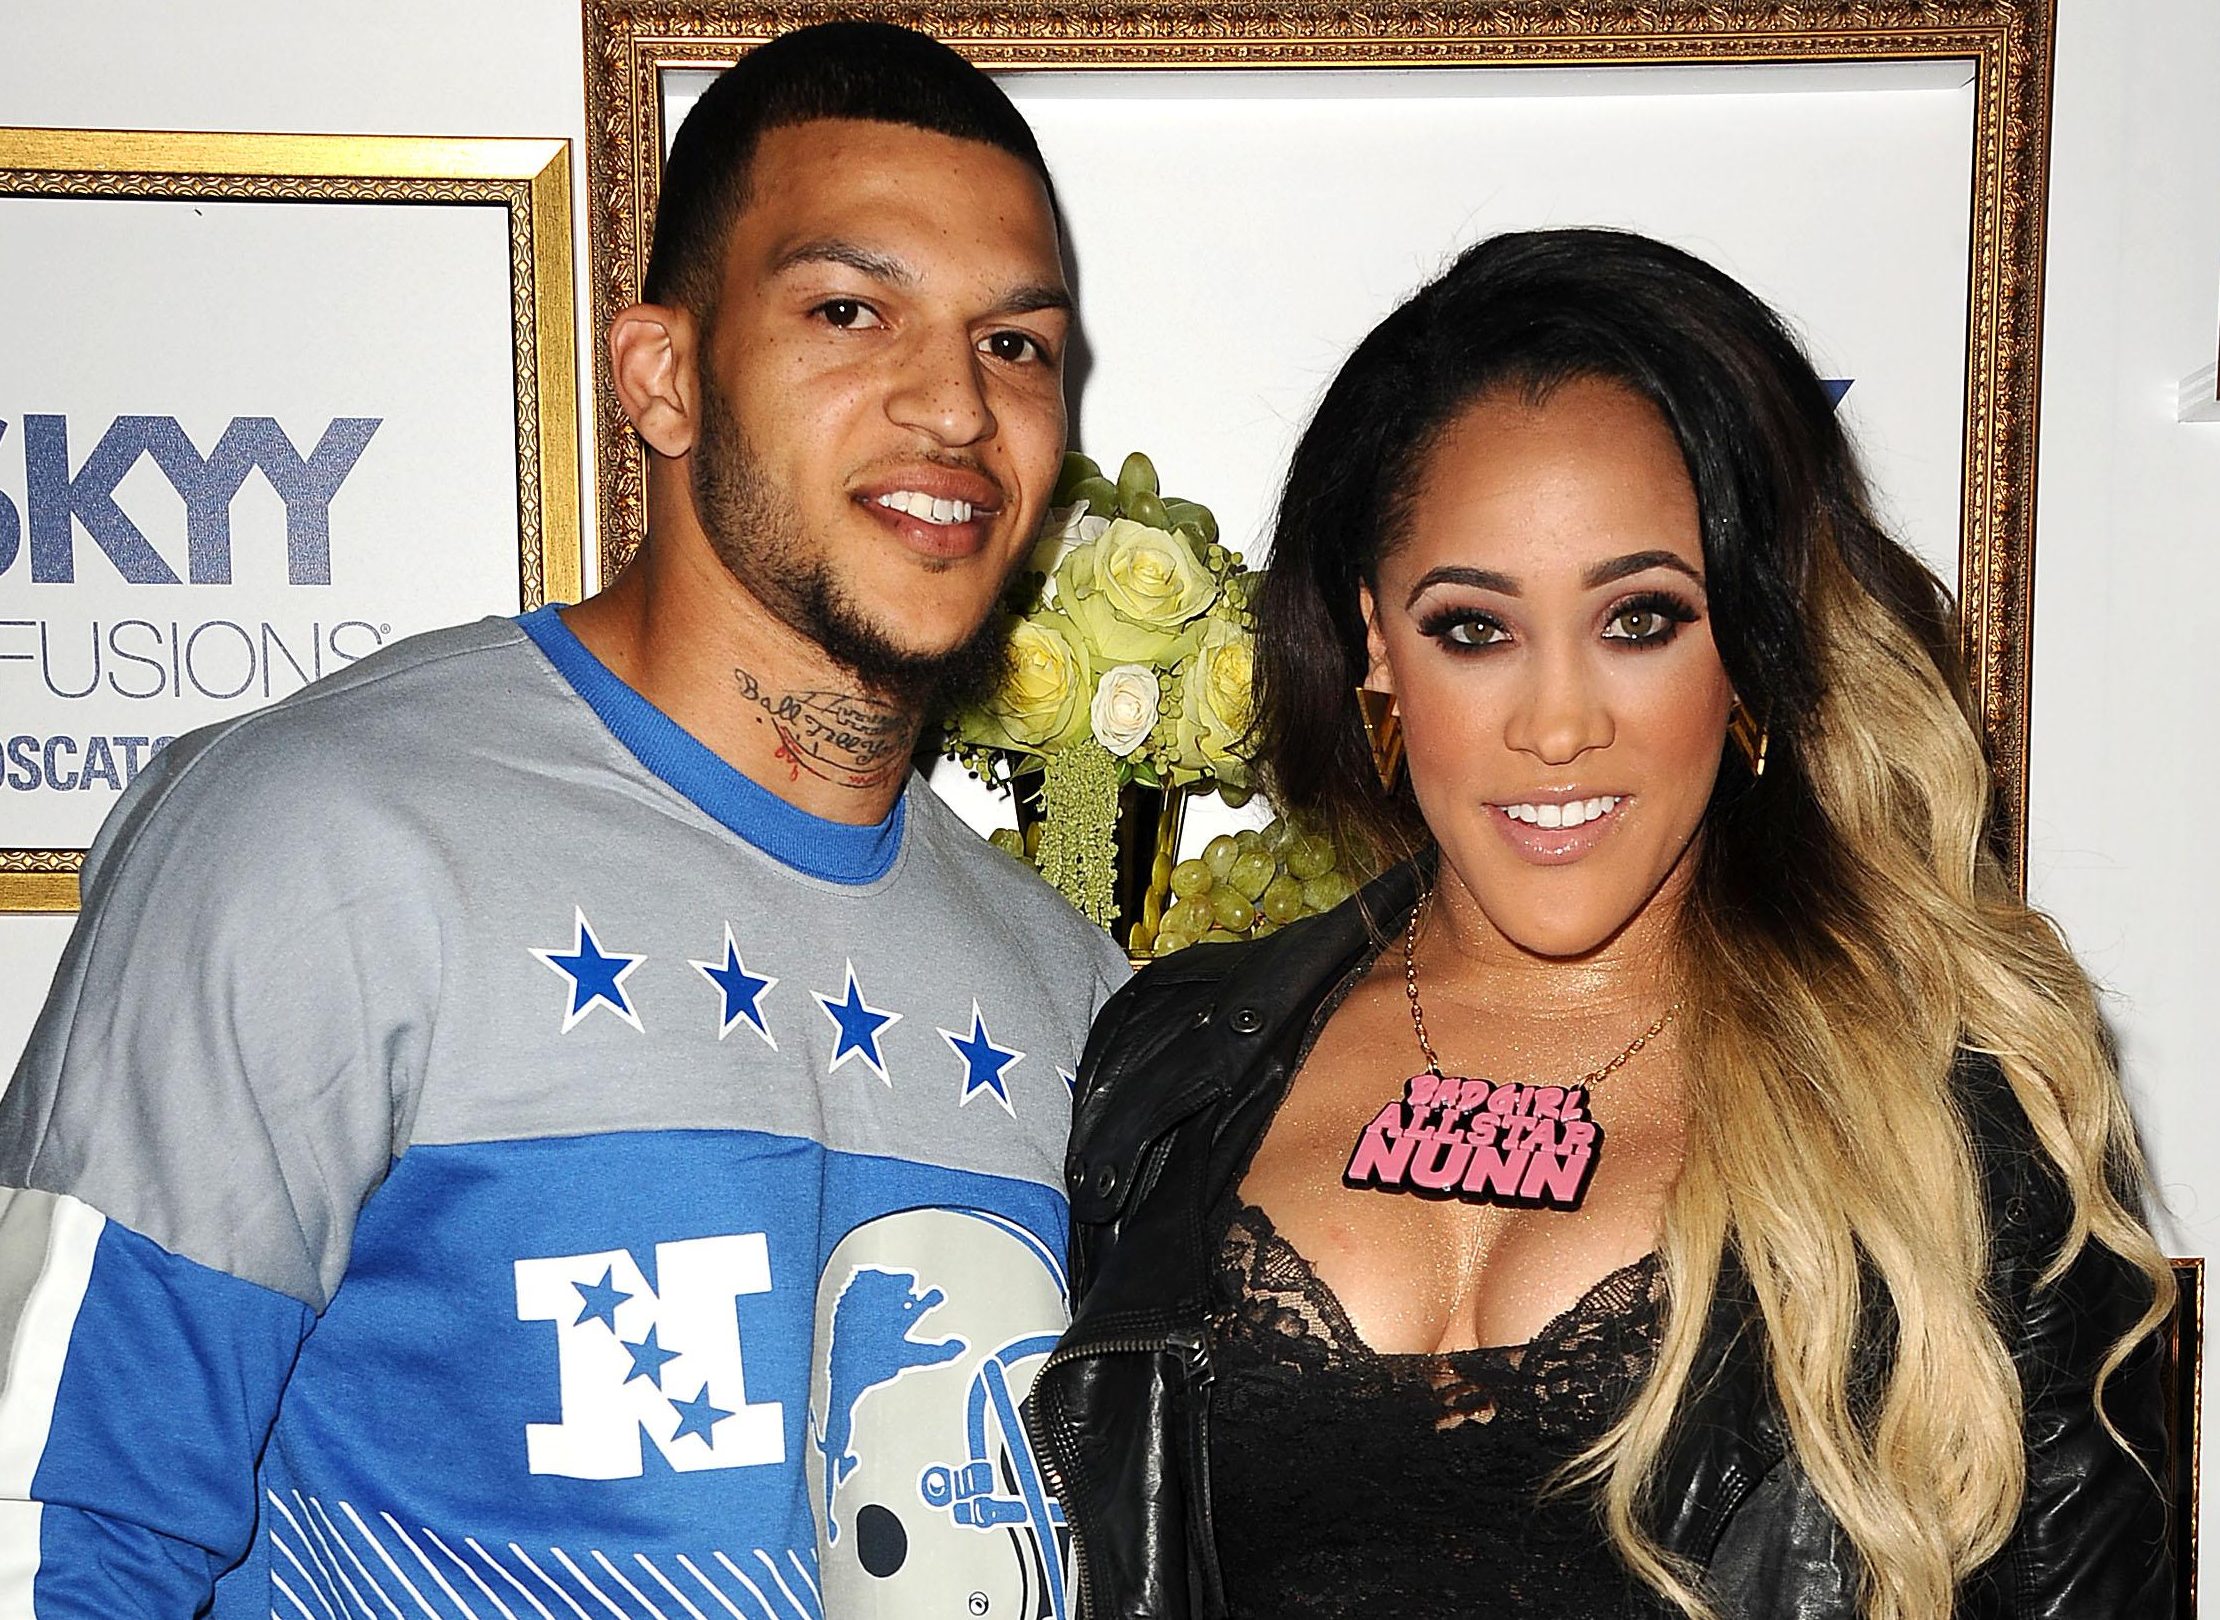 Natalie Nunn and Hubby Head To The UK To Confront Her Threesome Accuser? pic pic